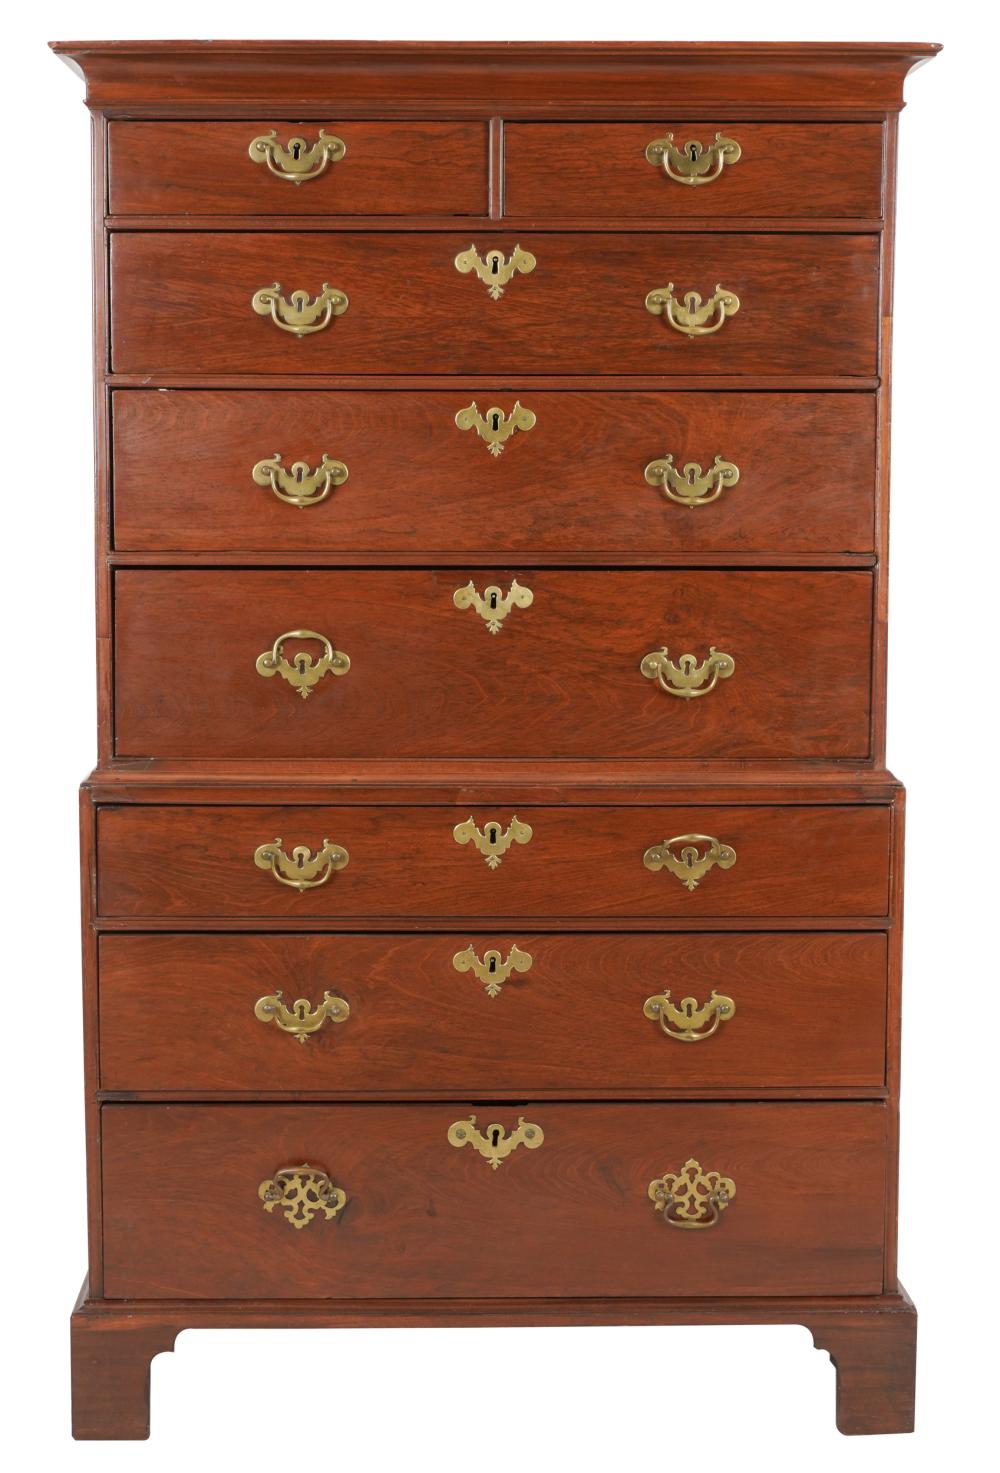 CHIPPENDALE-STYLE MAHOGANY CHEST